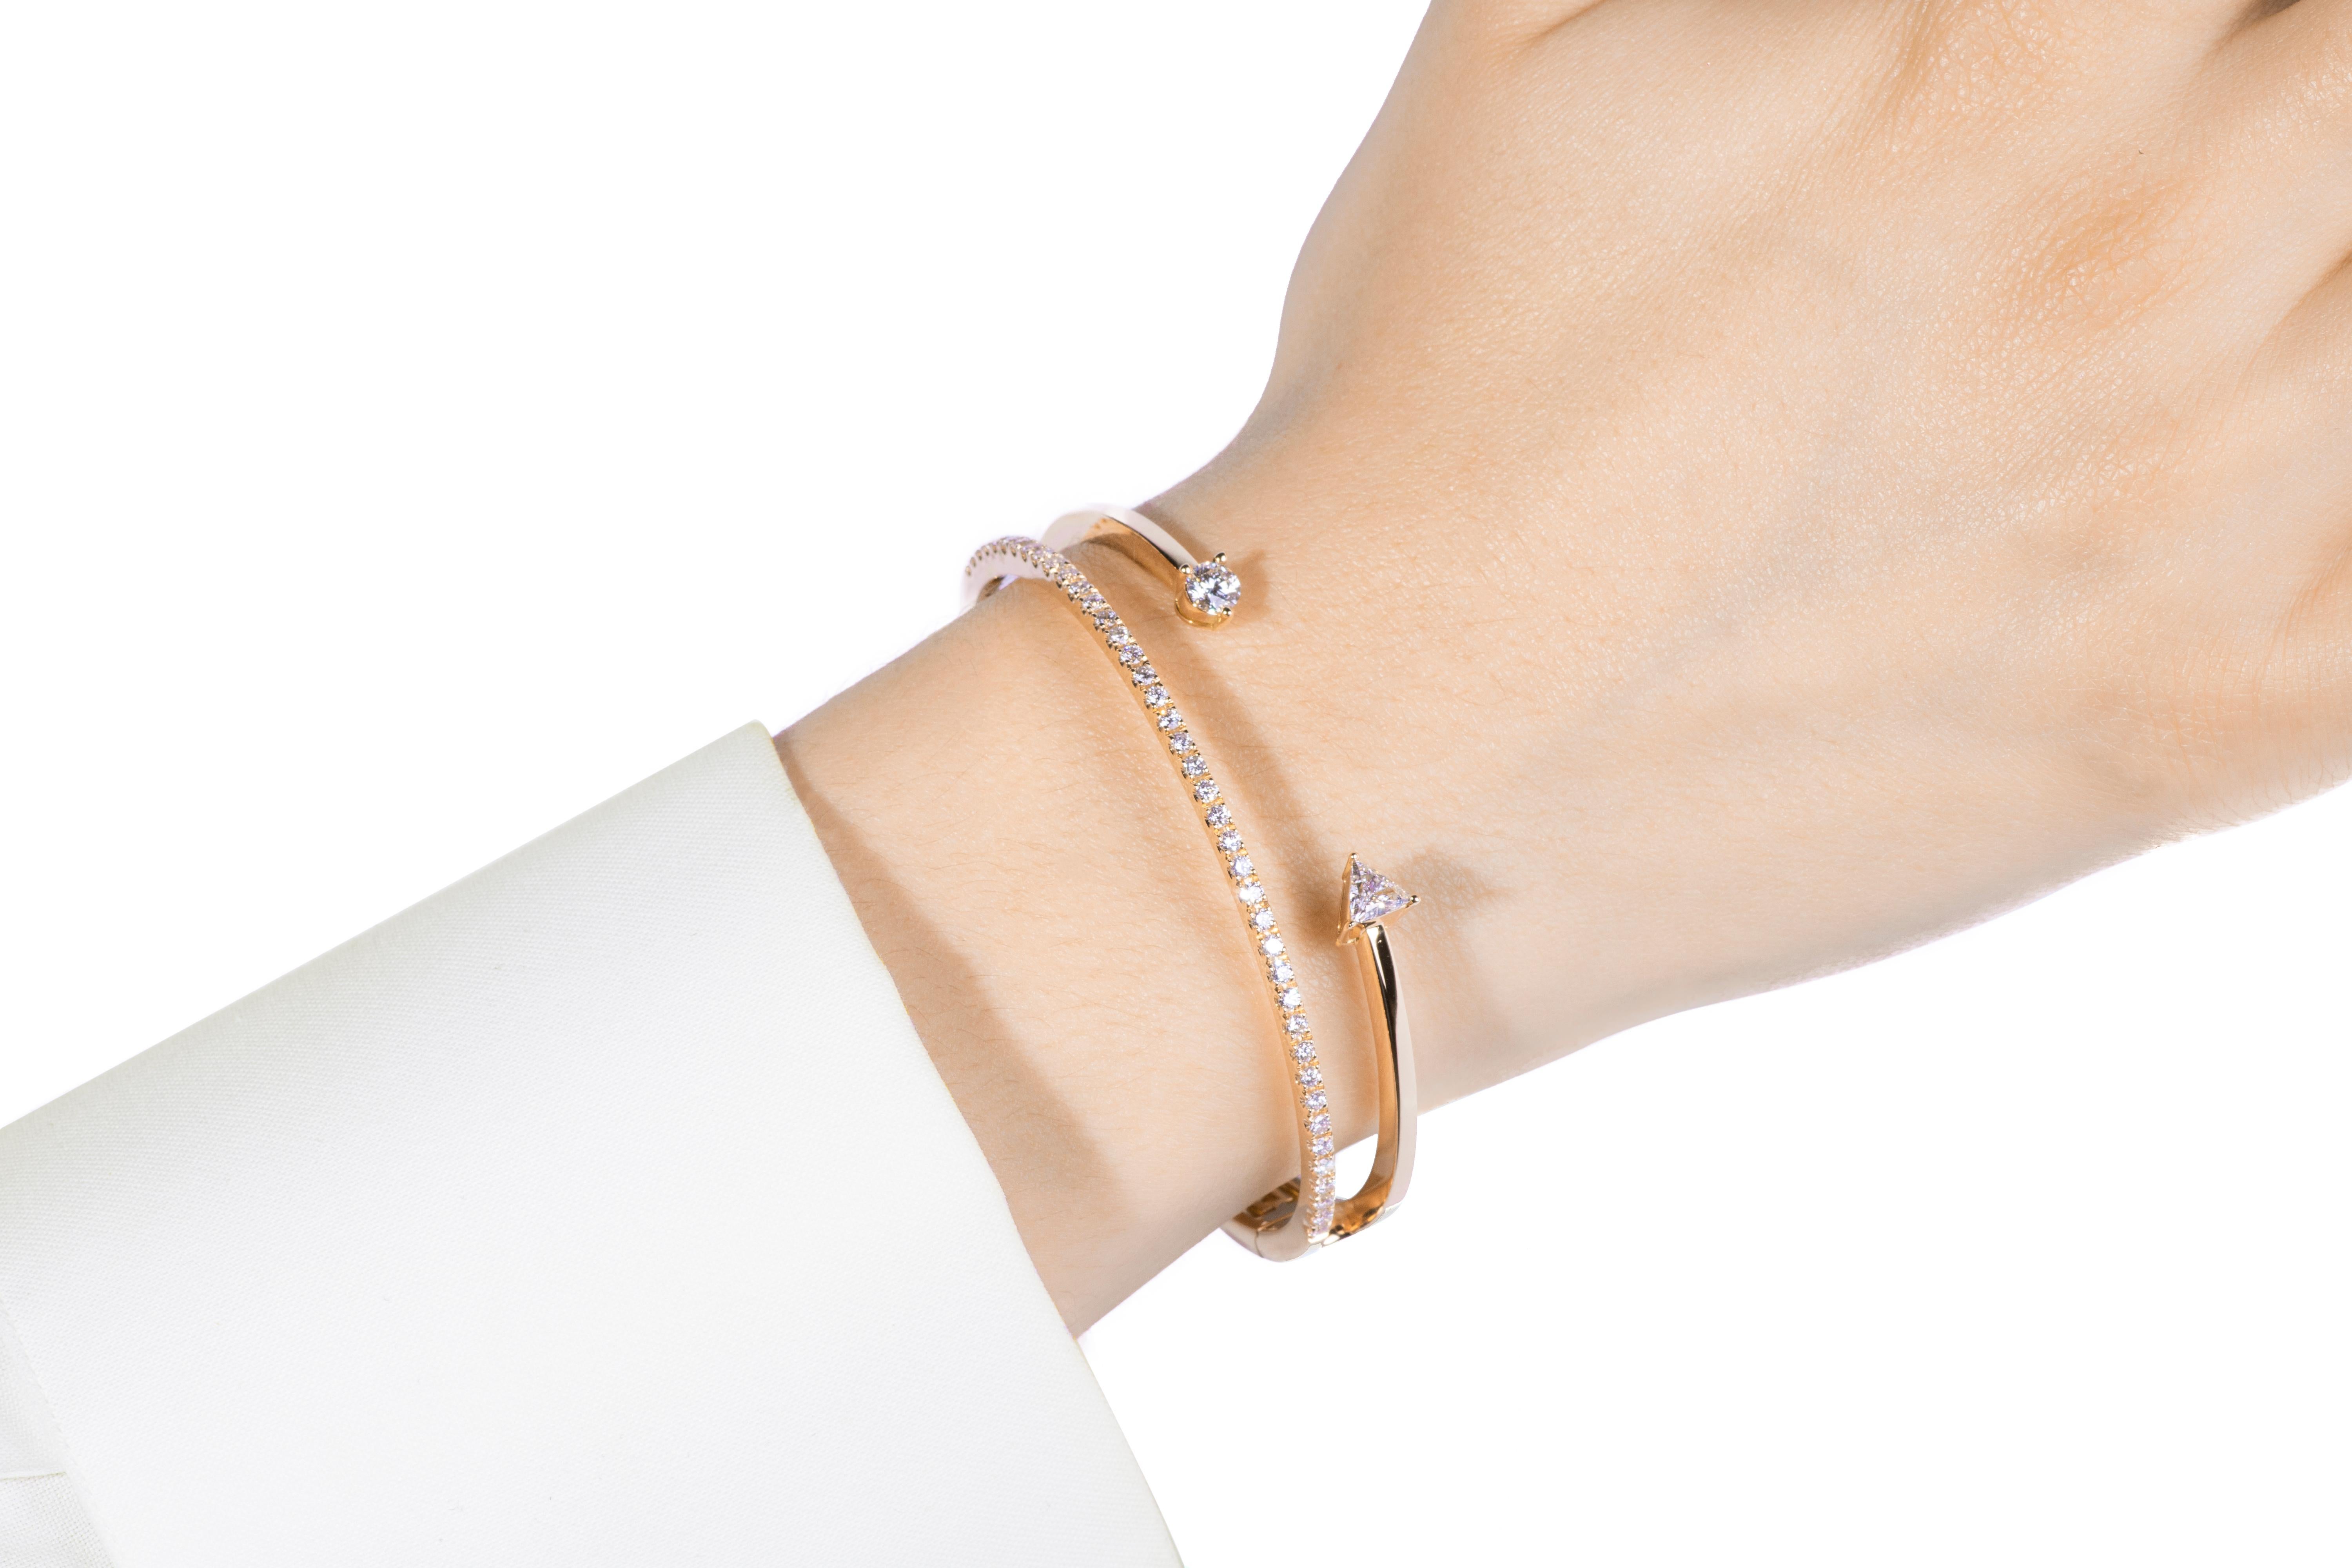 This unique bracelet is part of the Marry Me collection by Delfina Delettrez, designed to challenge traditional engagement jewellery codes. The bracelet is handcrafted in Rome from 47 gr gold 18k and features a band of 41 diamonds 1 ct., one round